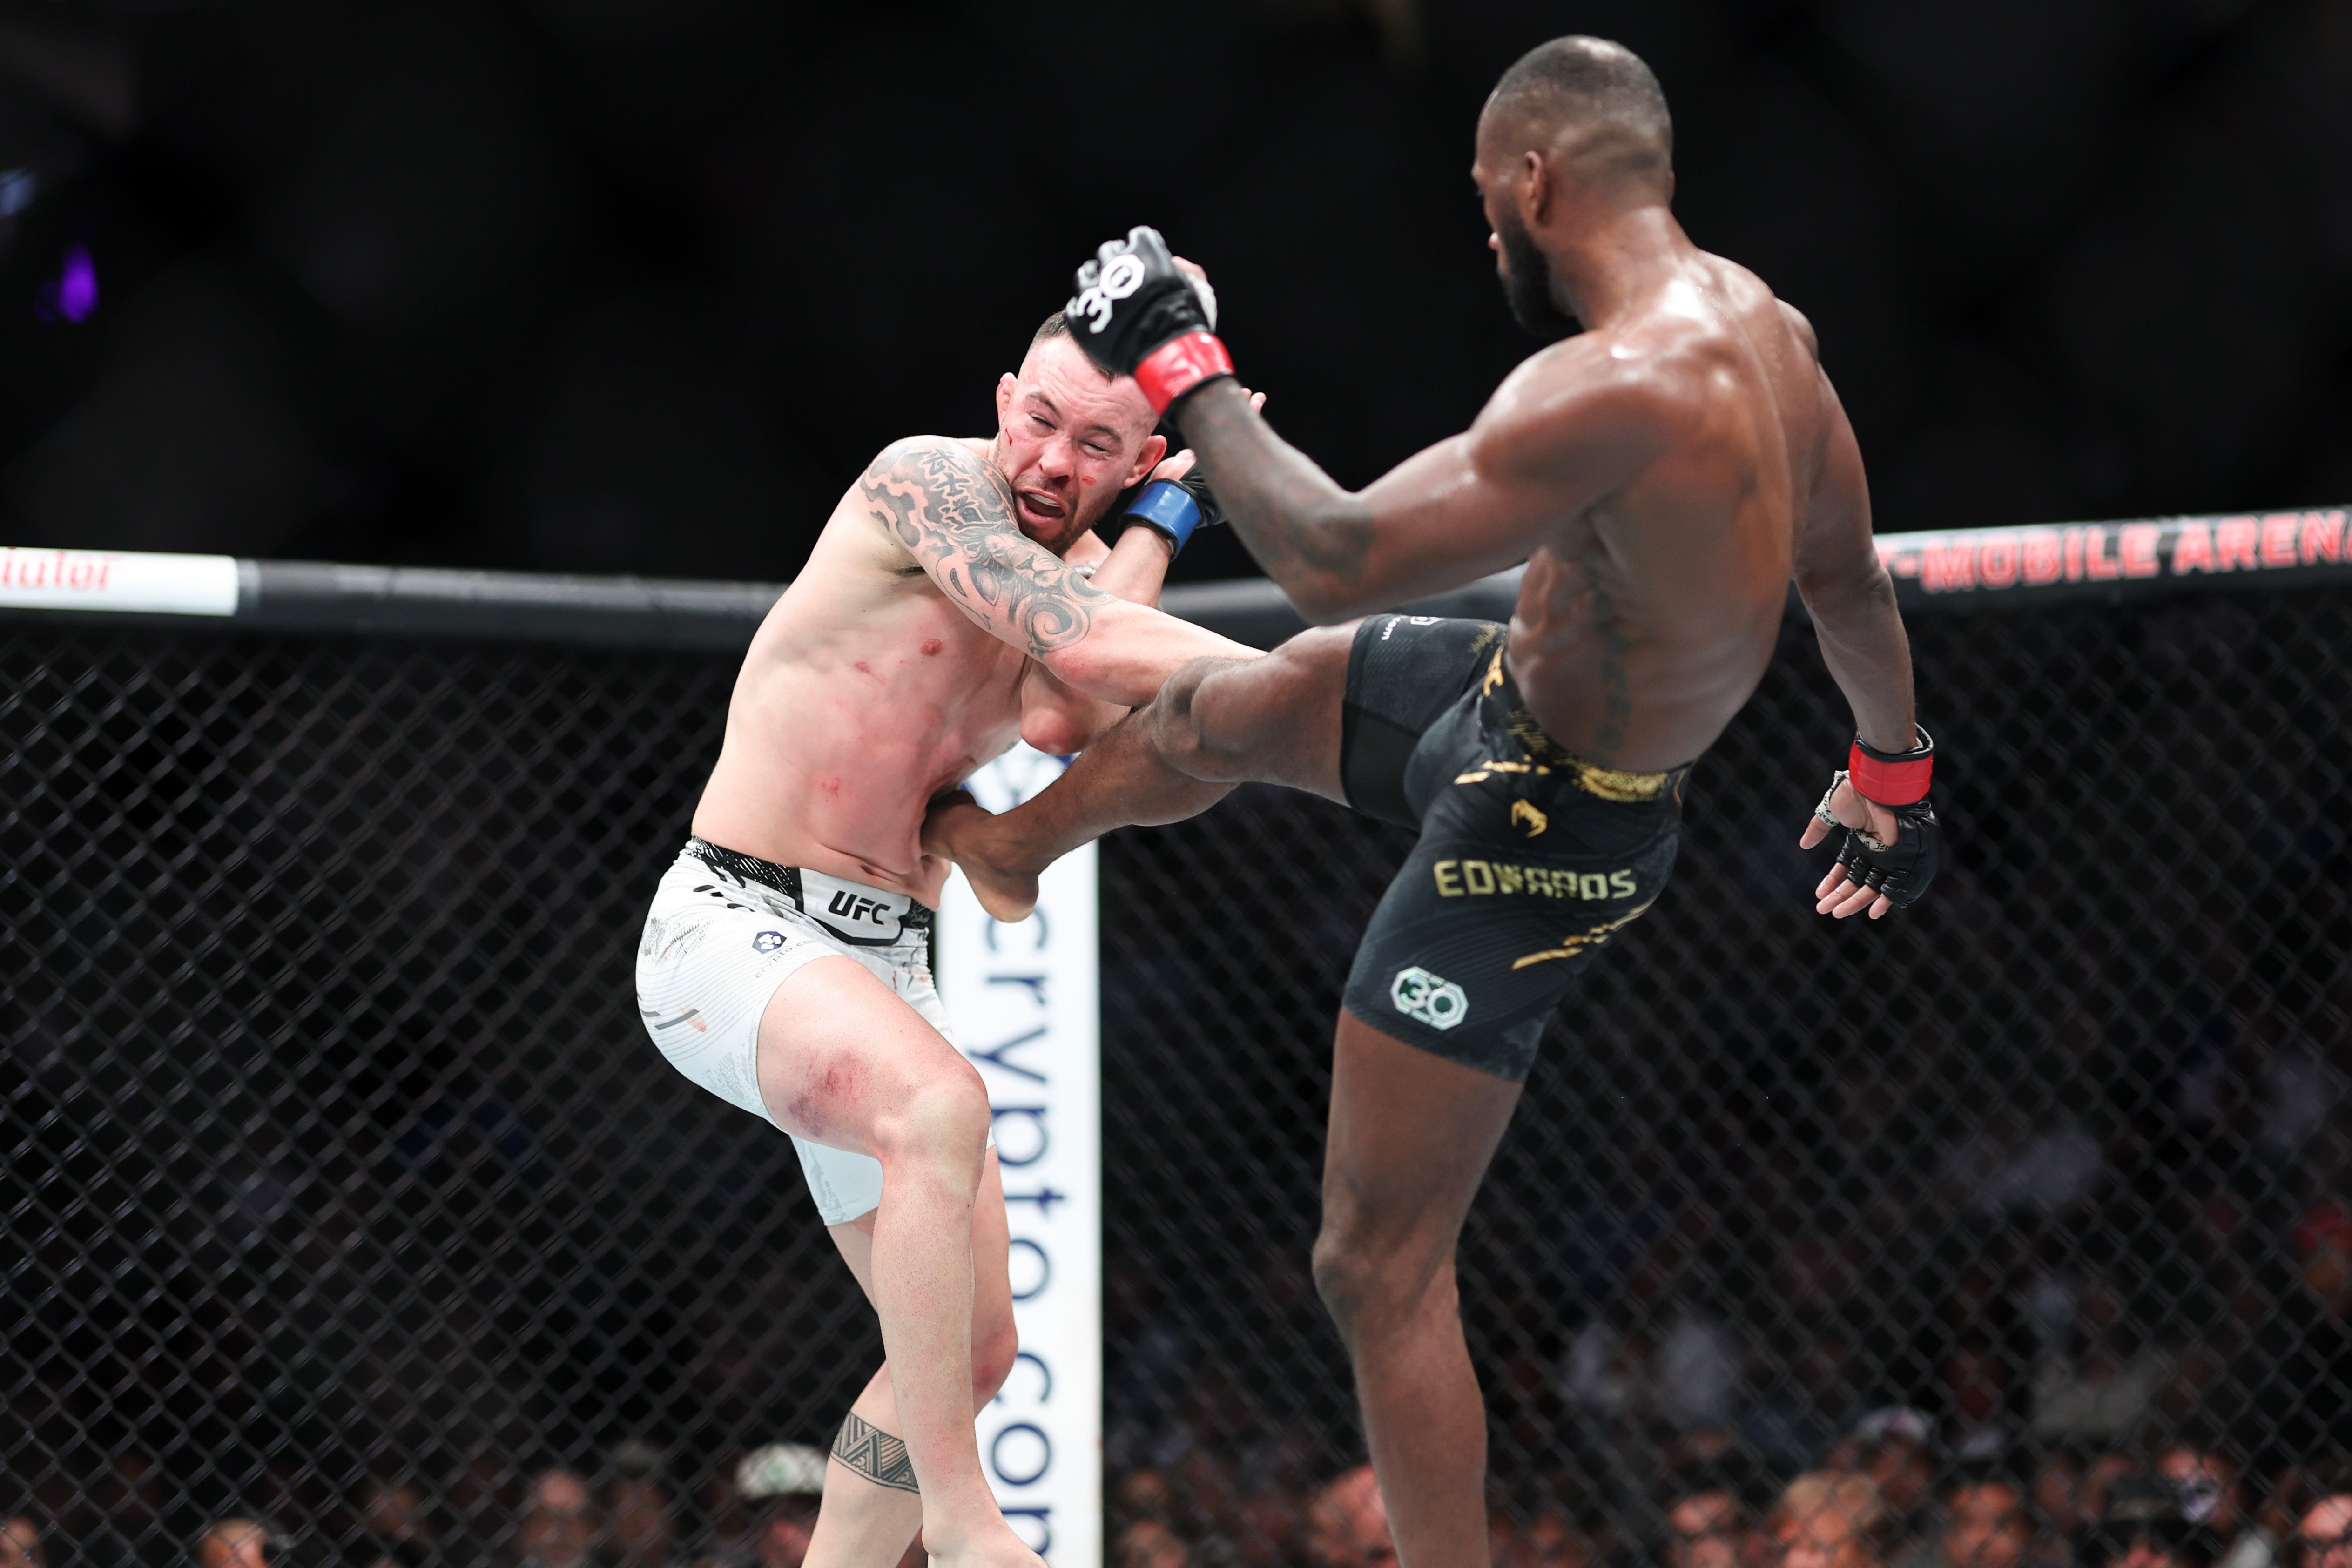 Covington failed to reclaim his welterweight title from Leon Edwards at UFC 296 in Las Vegas on 17 December